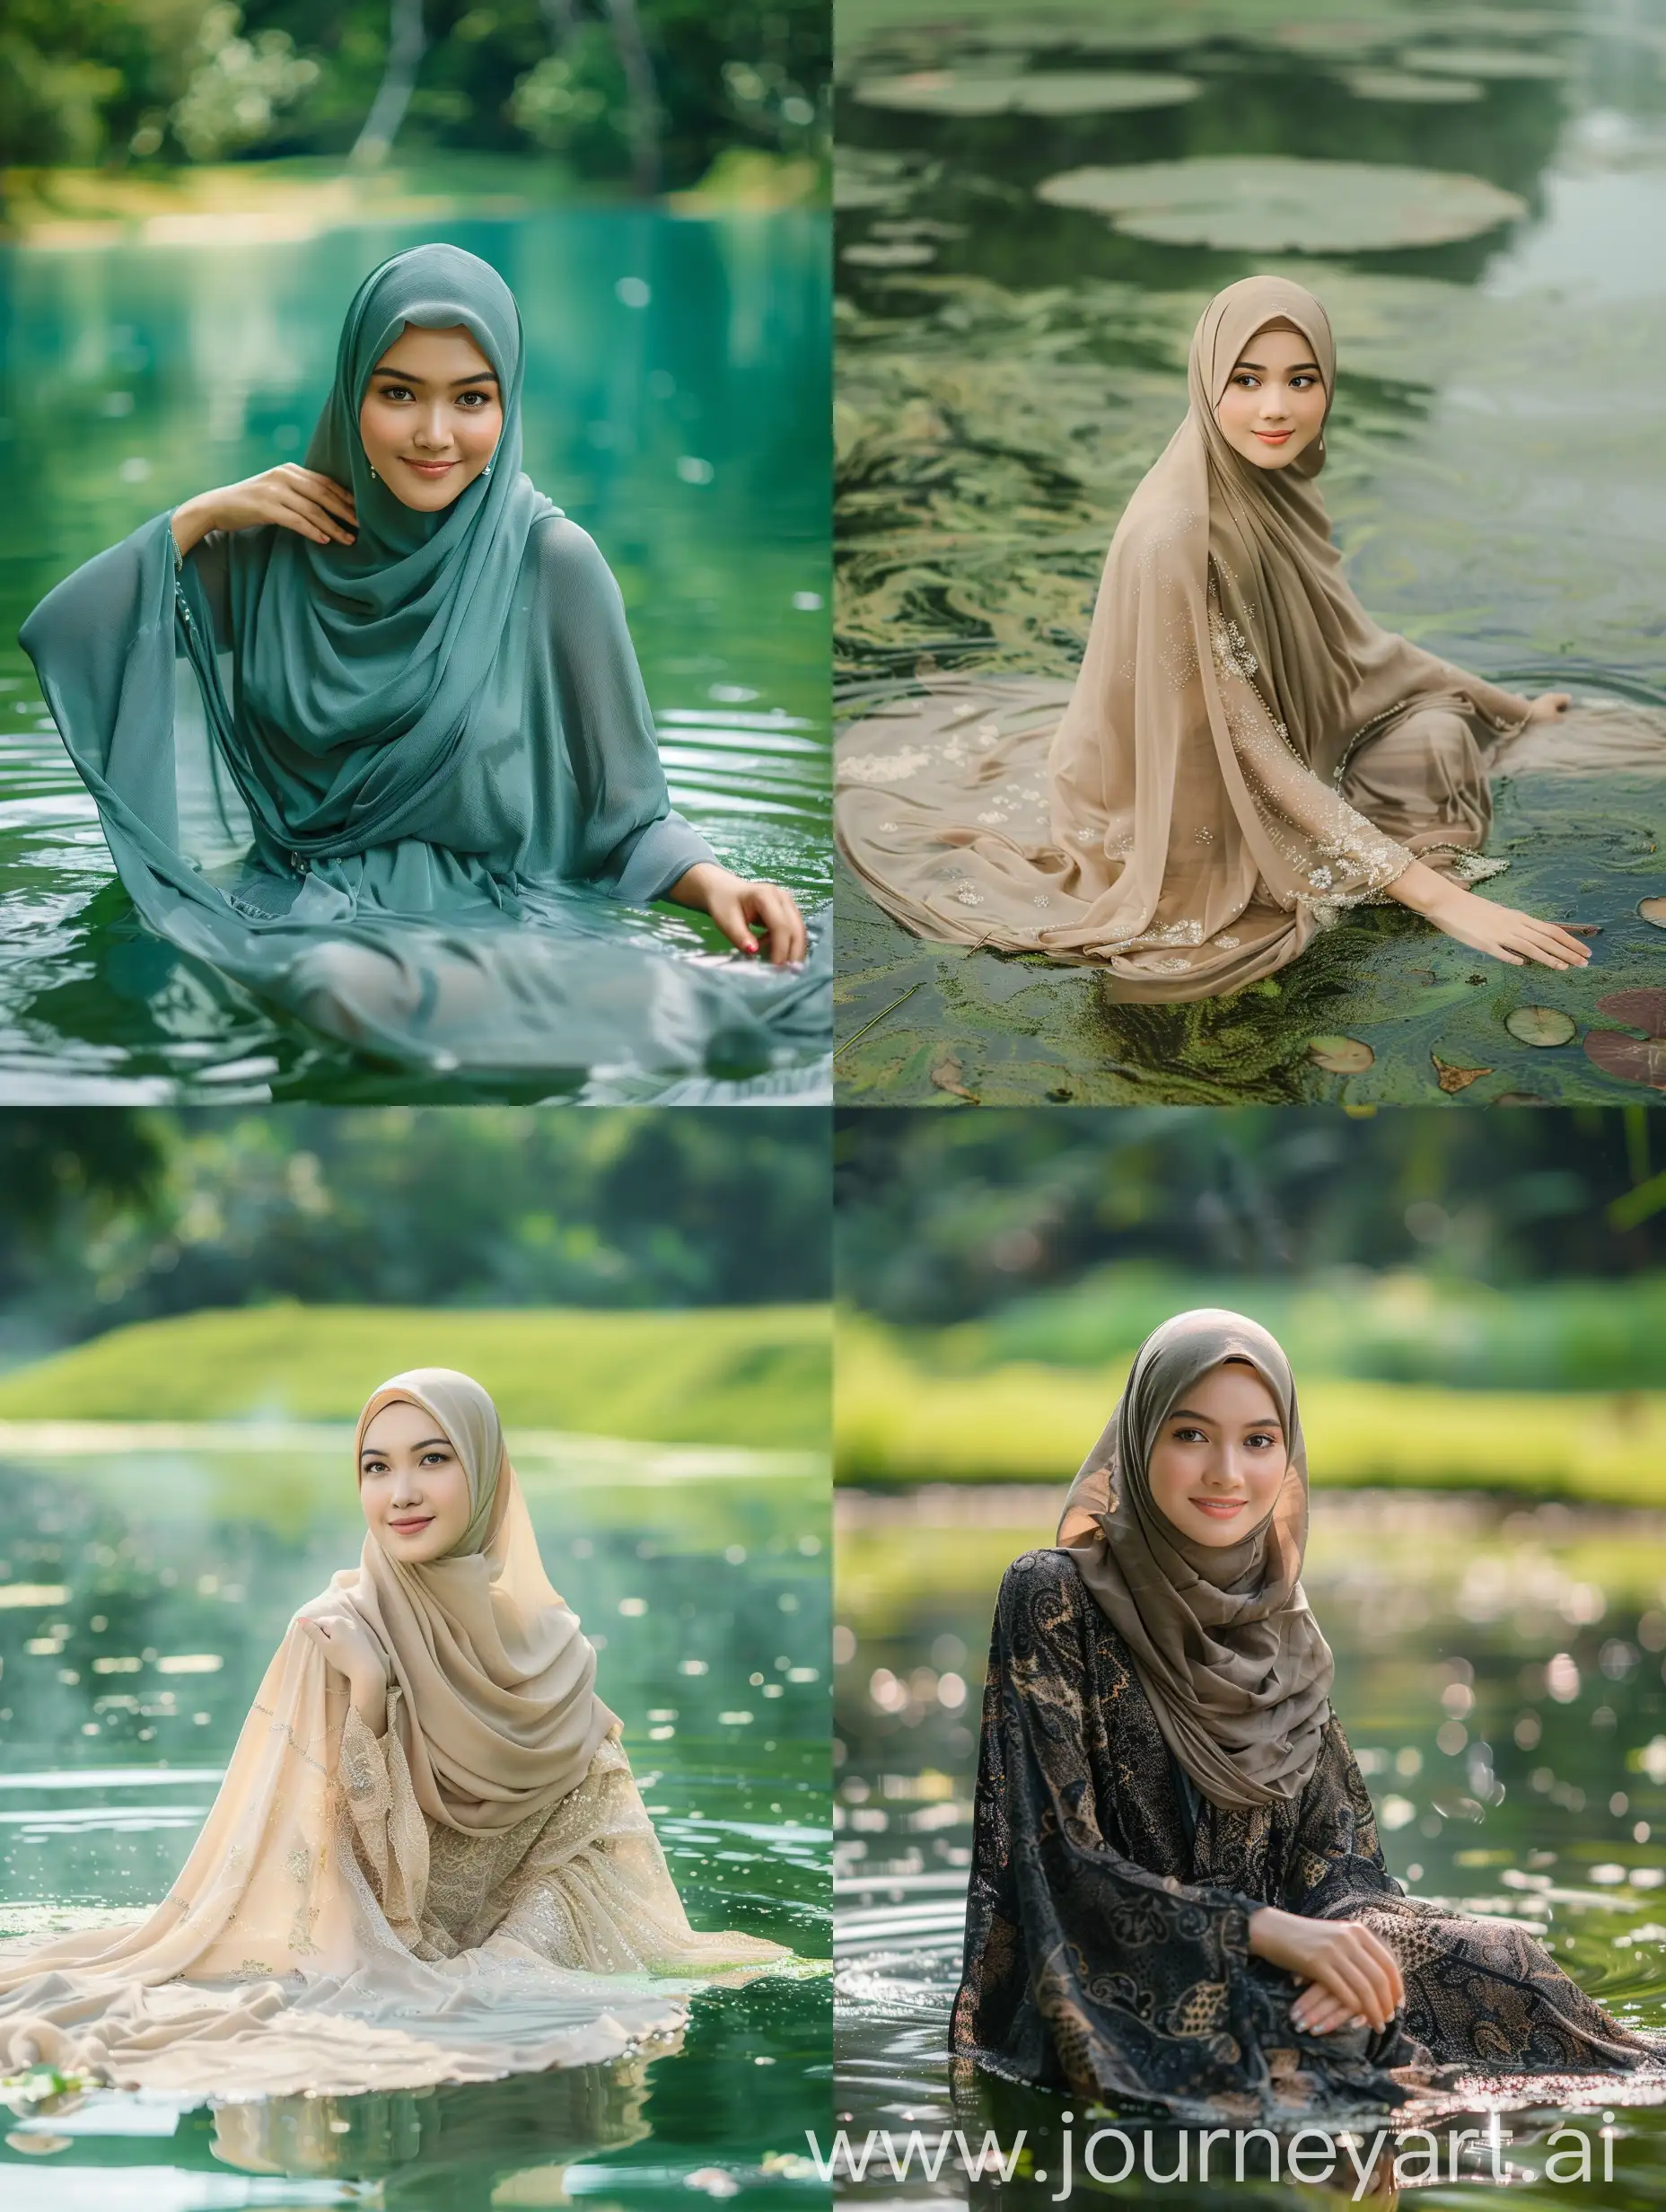 Beautiful-Indonesian-Woman-in-Hijab-Sitting-by-Pond-on-Green-Lawn